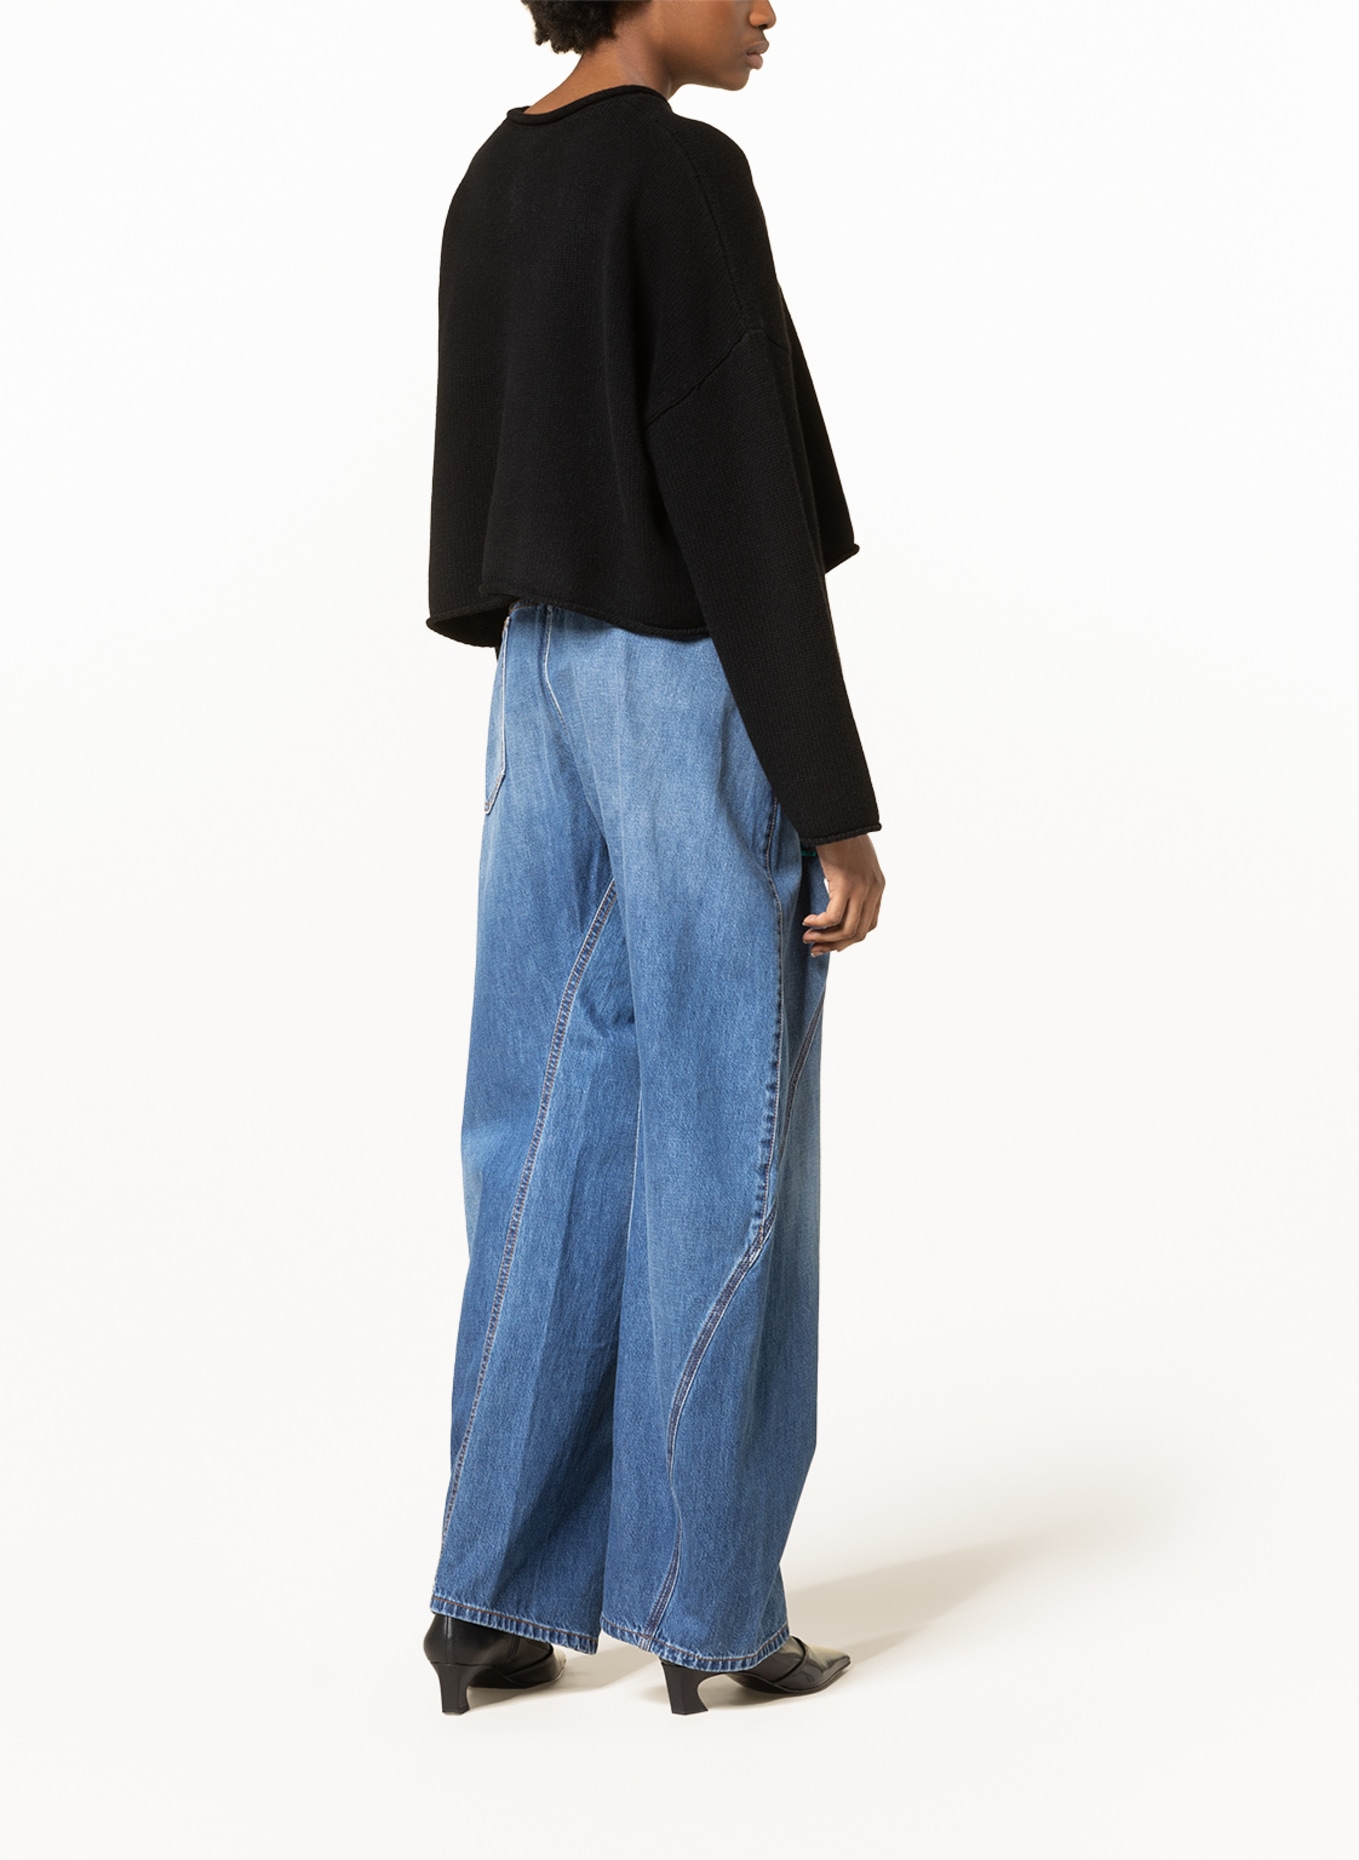 JW ANDERSON Cropped sweater, Color: BLACK (Image 3)